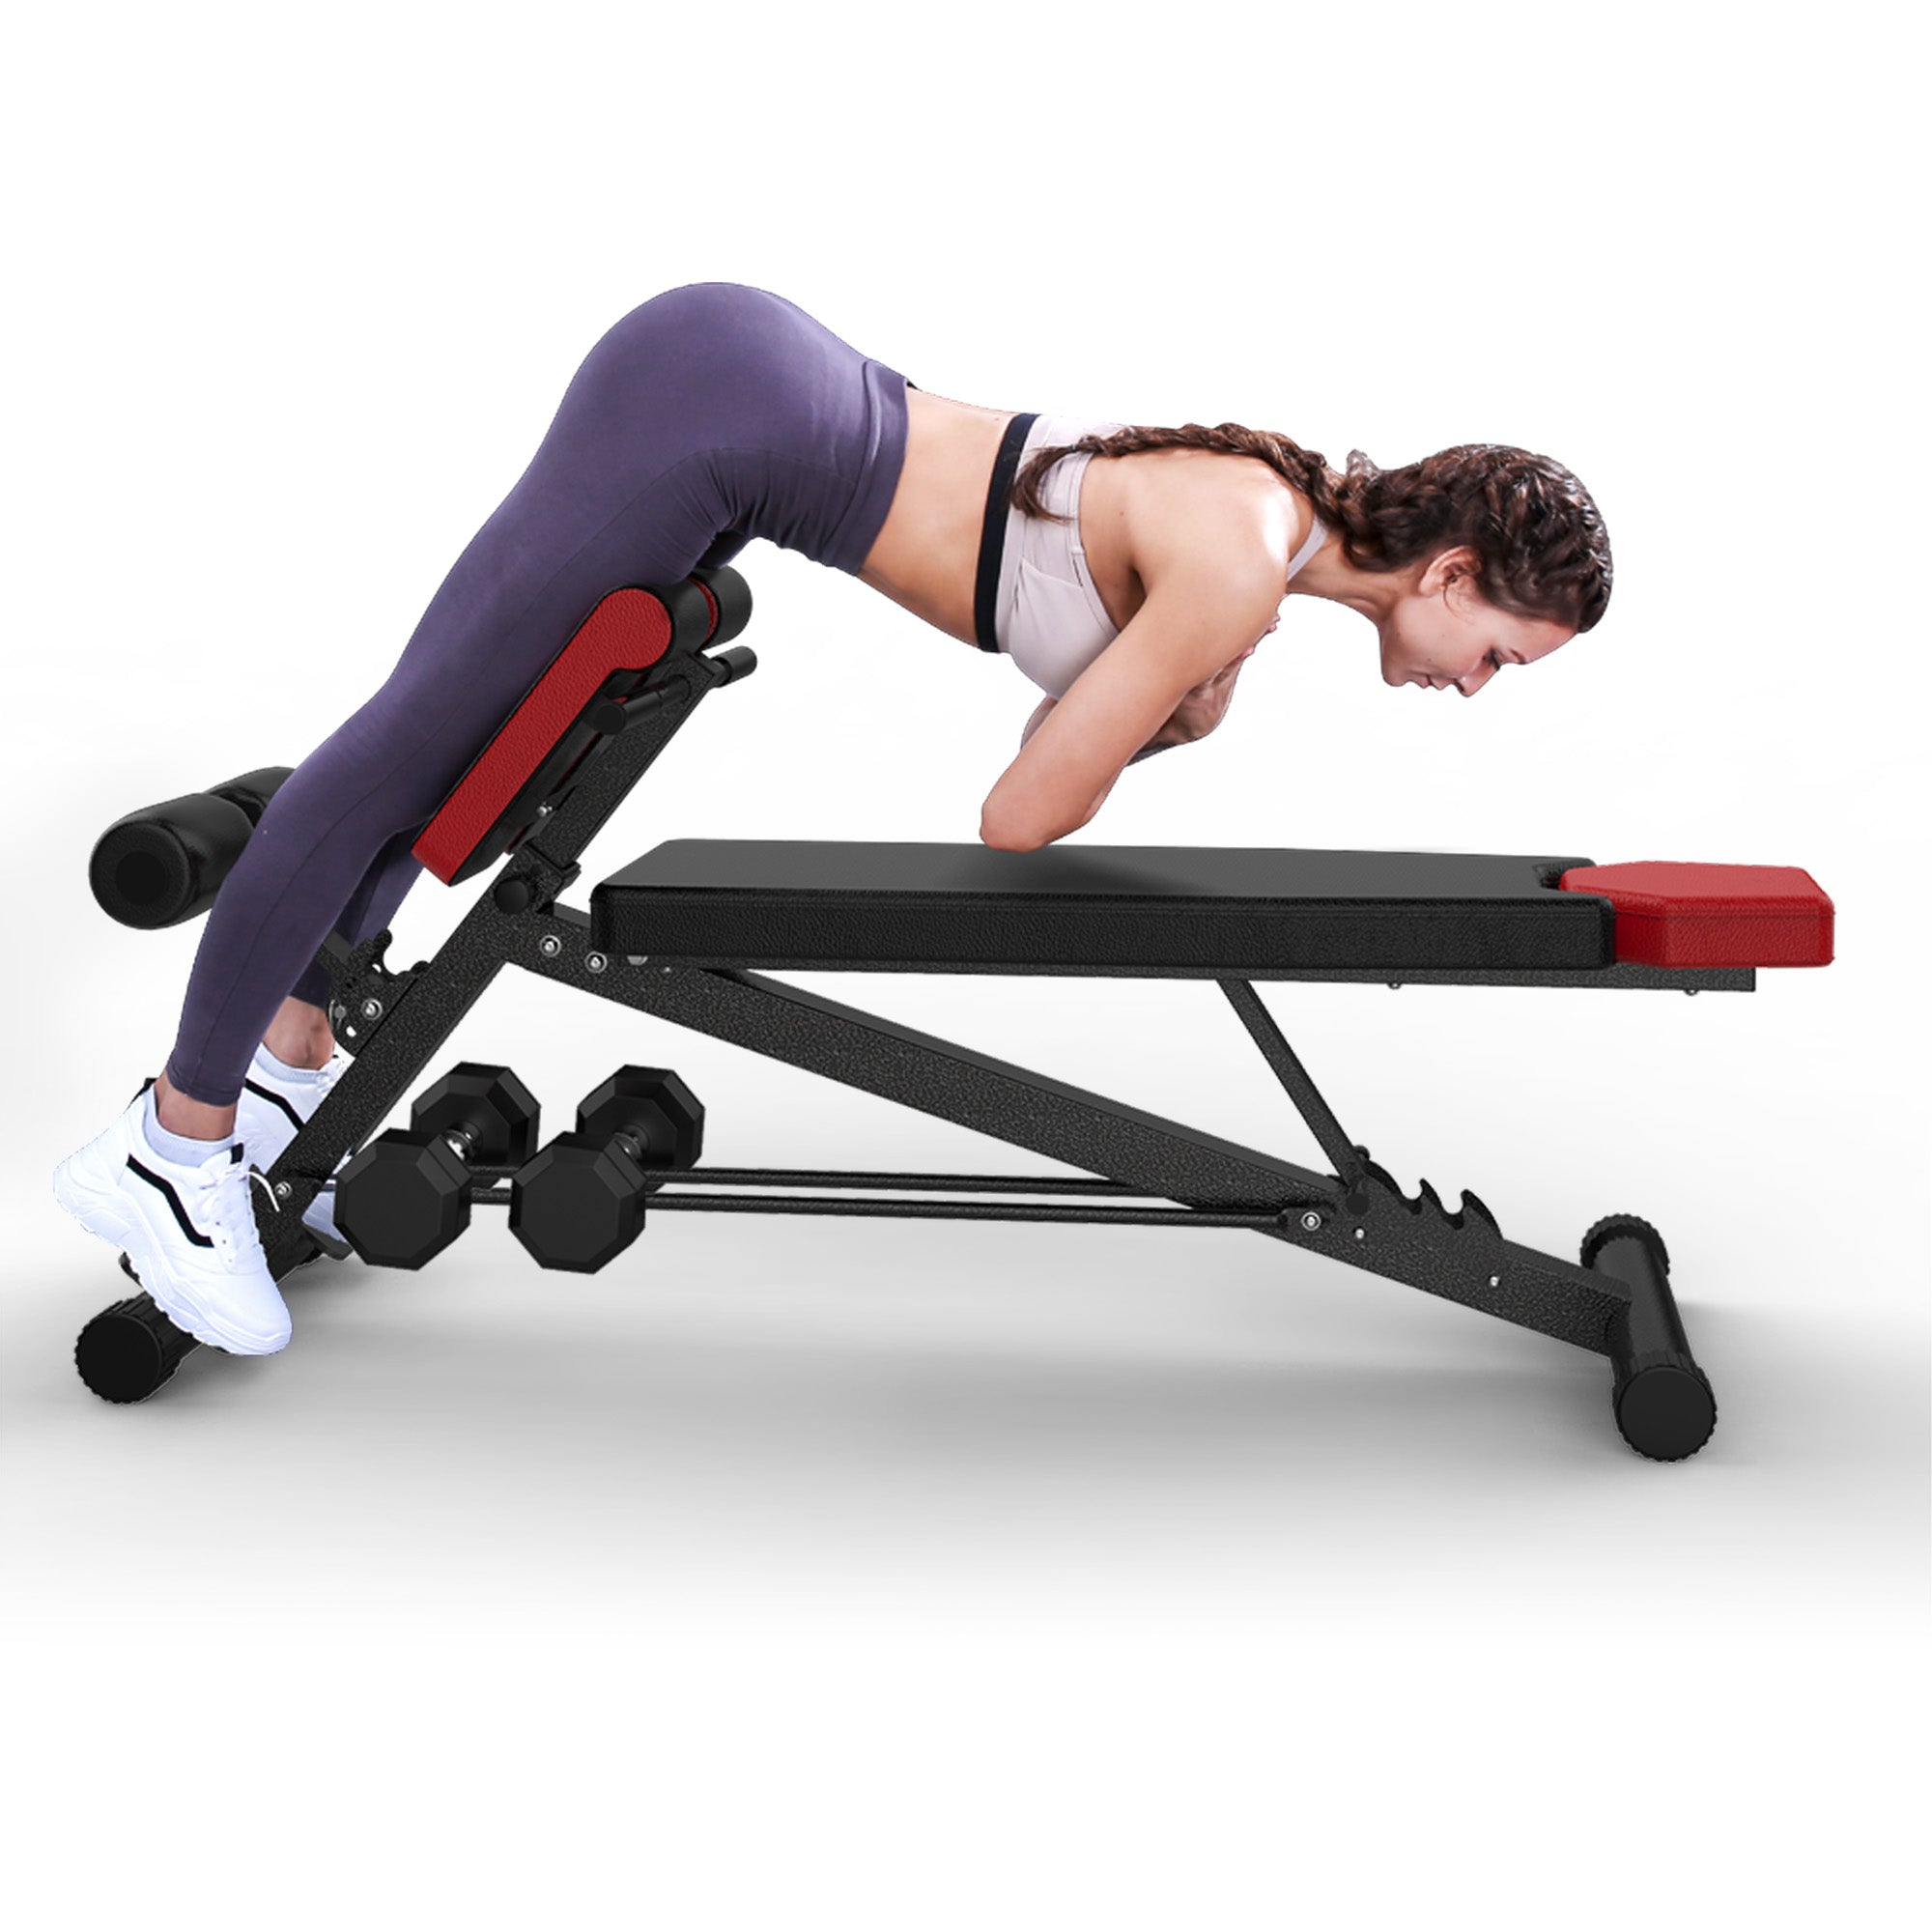 FLYBIRD 3 in 1 Multi-Functional Weight Bench of Roman Chair, Workout Bench  and Sit Up Bench for Hyper Back Extension, Full Body Workout, with Handle,  Abdomen core and Comprehensive Glute Training Home